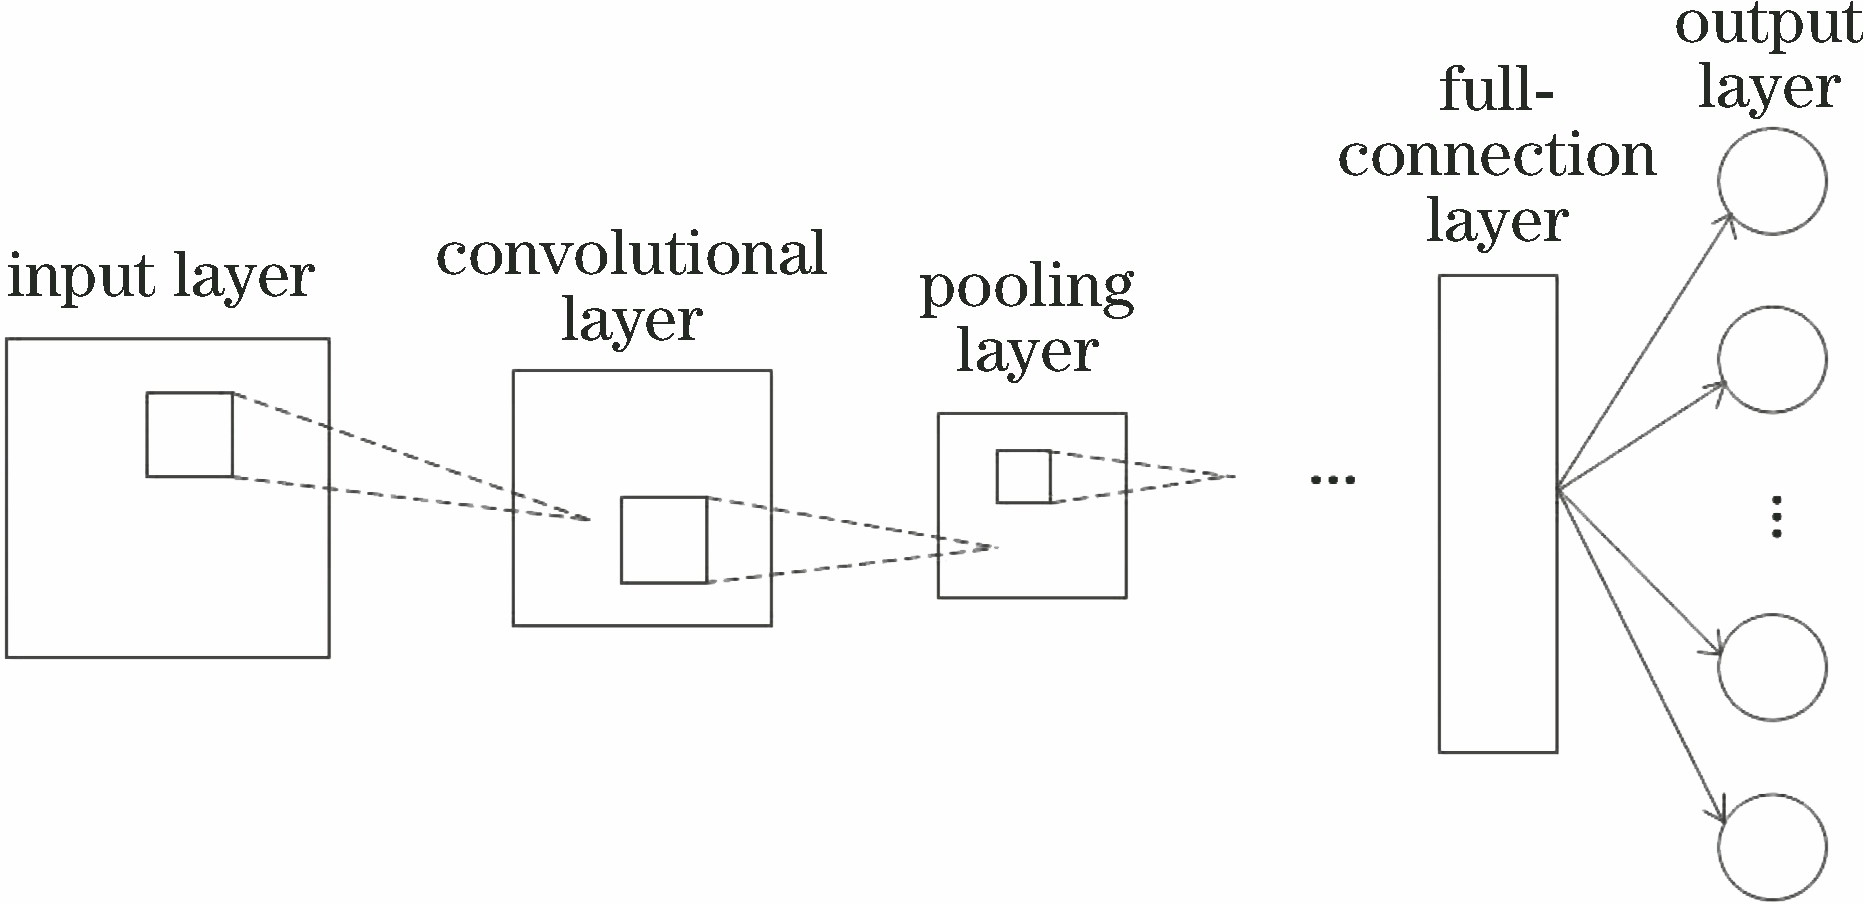 Basic structure of convolutional neural network